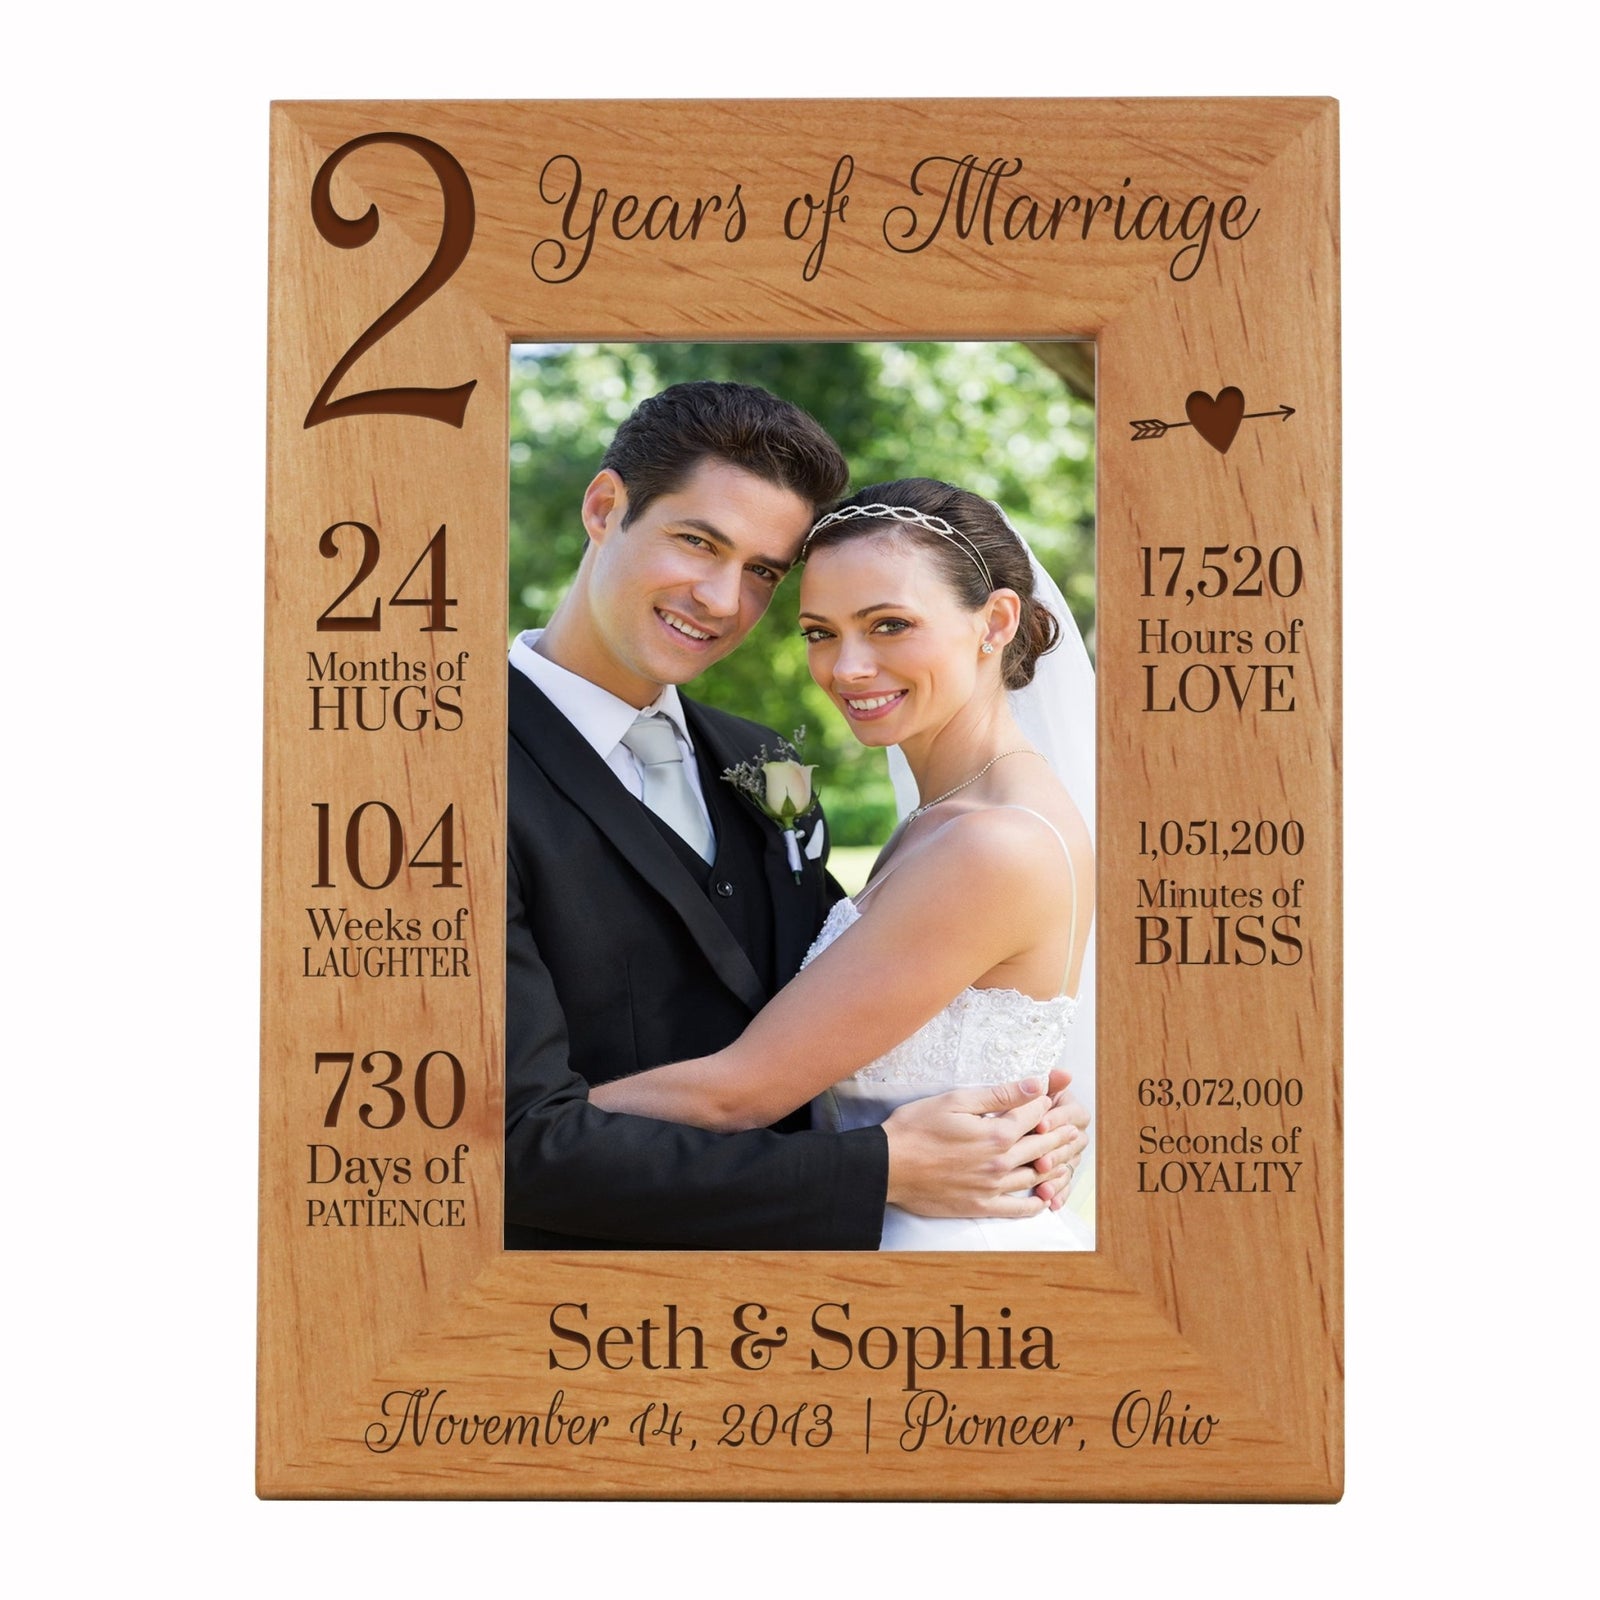 Lifesong Milestones Personalized Engraved 2nd Anniversary Photo Frame Gift for Couples